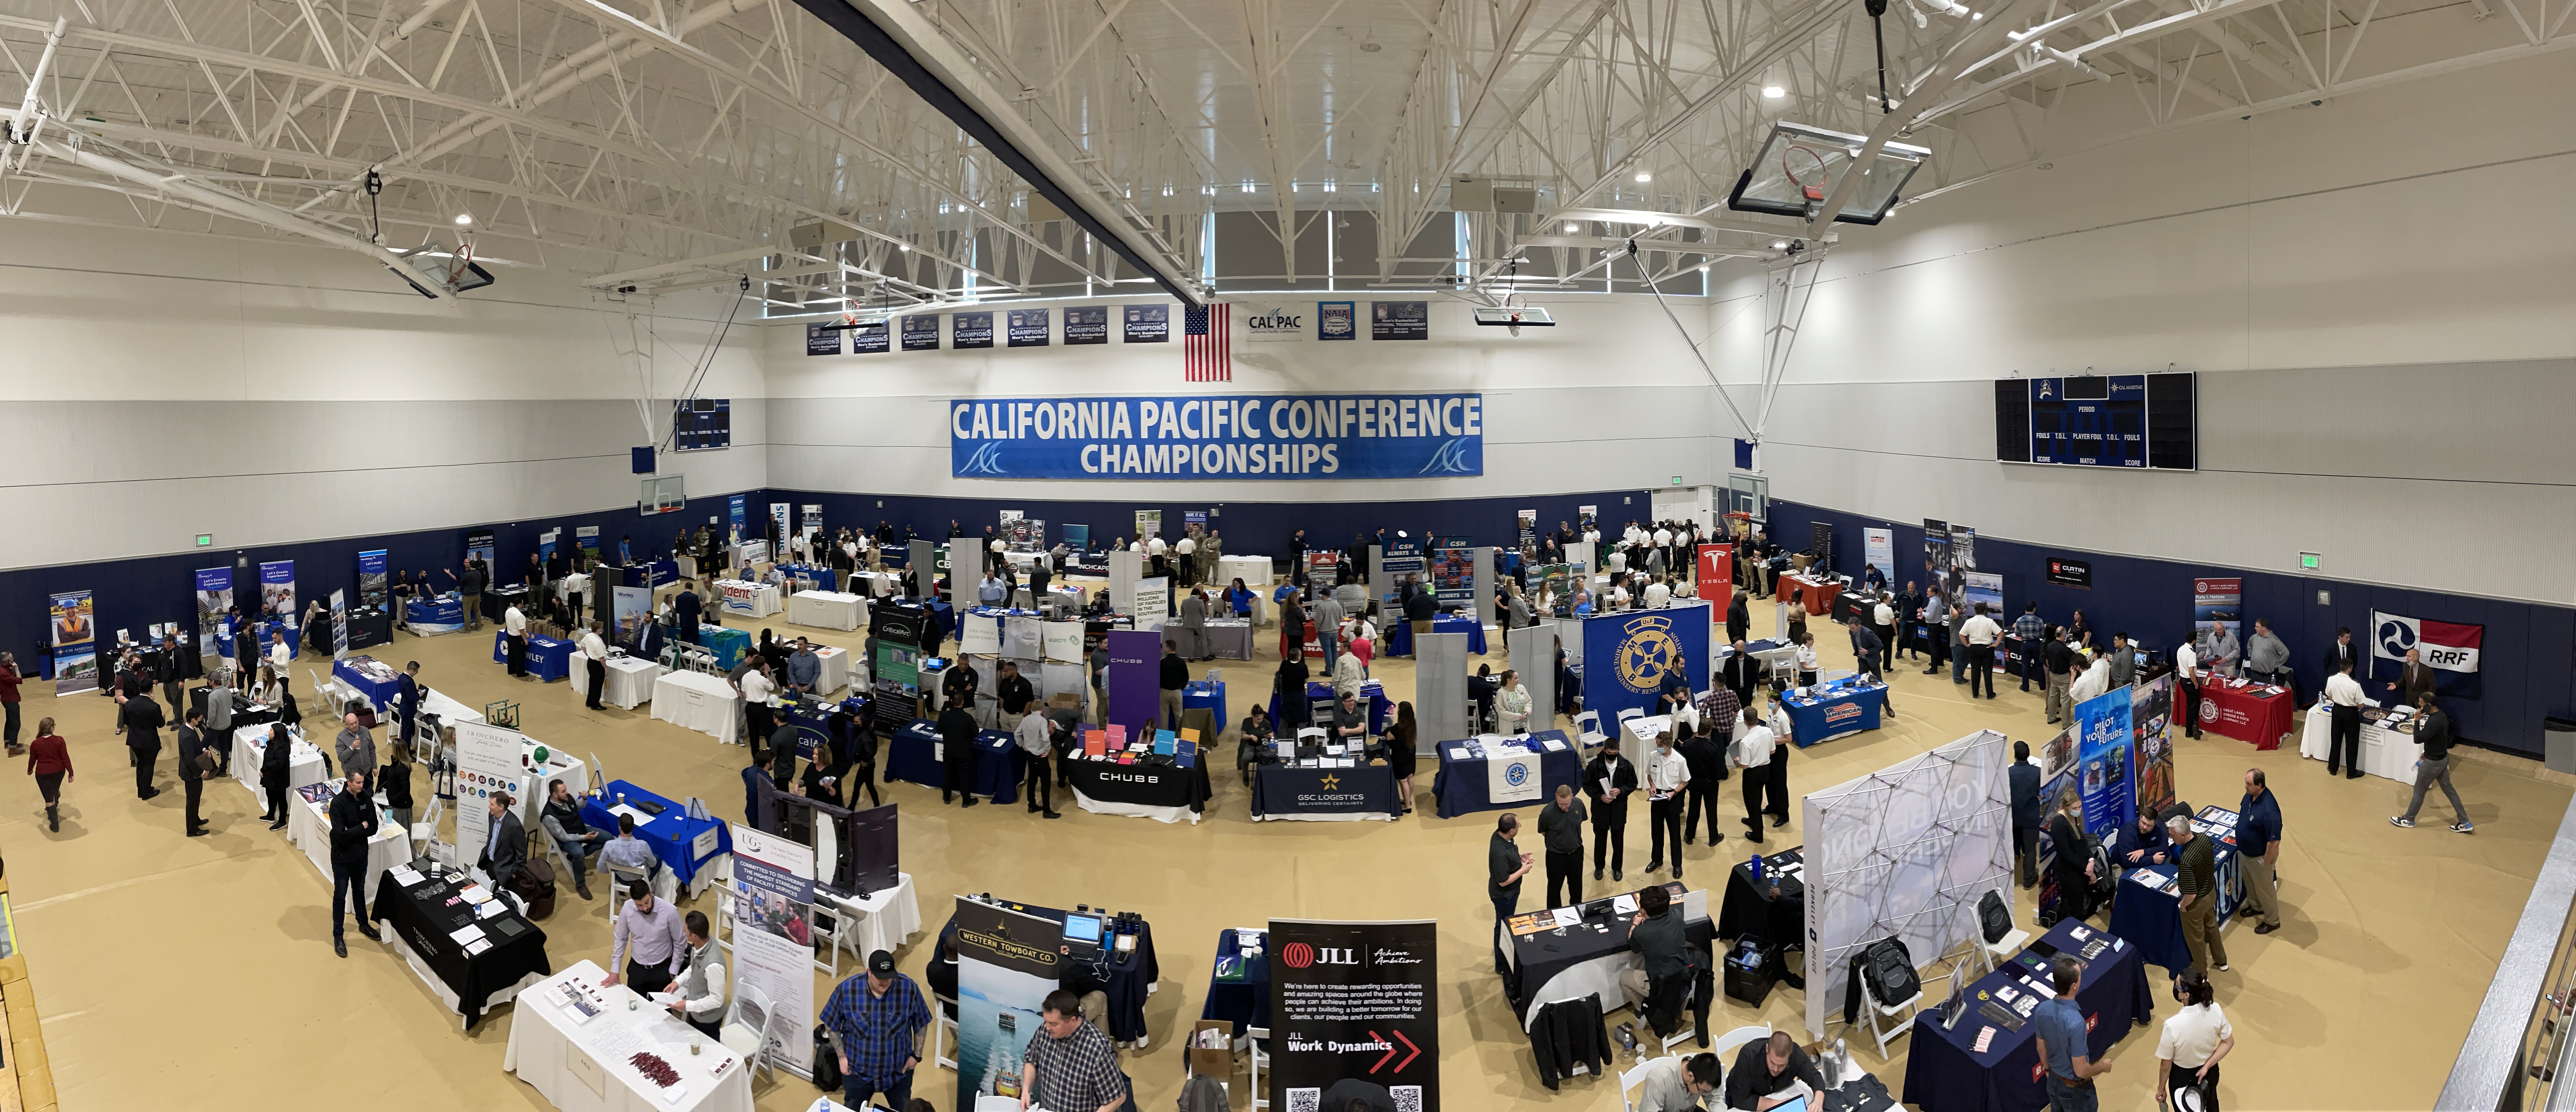 Spring 2022 Career Fair at the Physical Education and Aquatic Complex Gymnasium